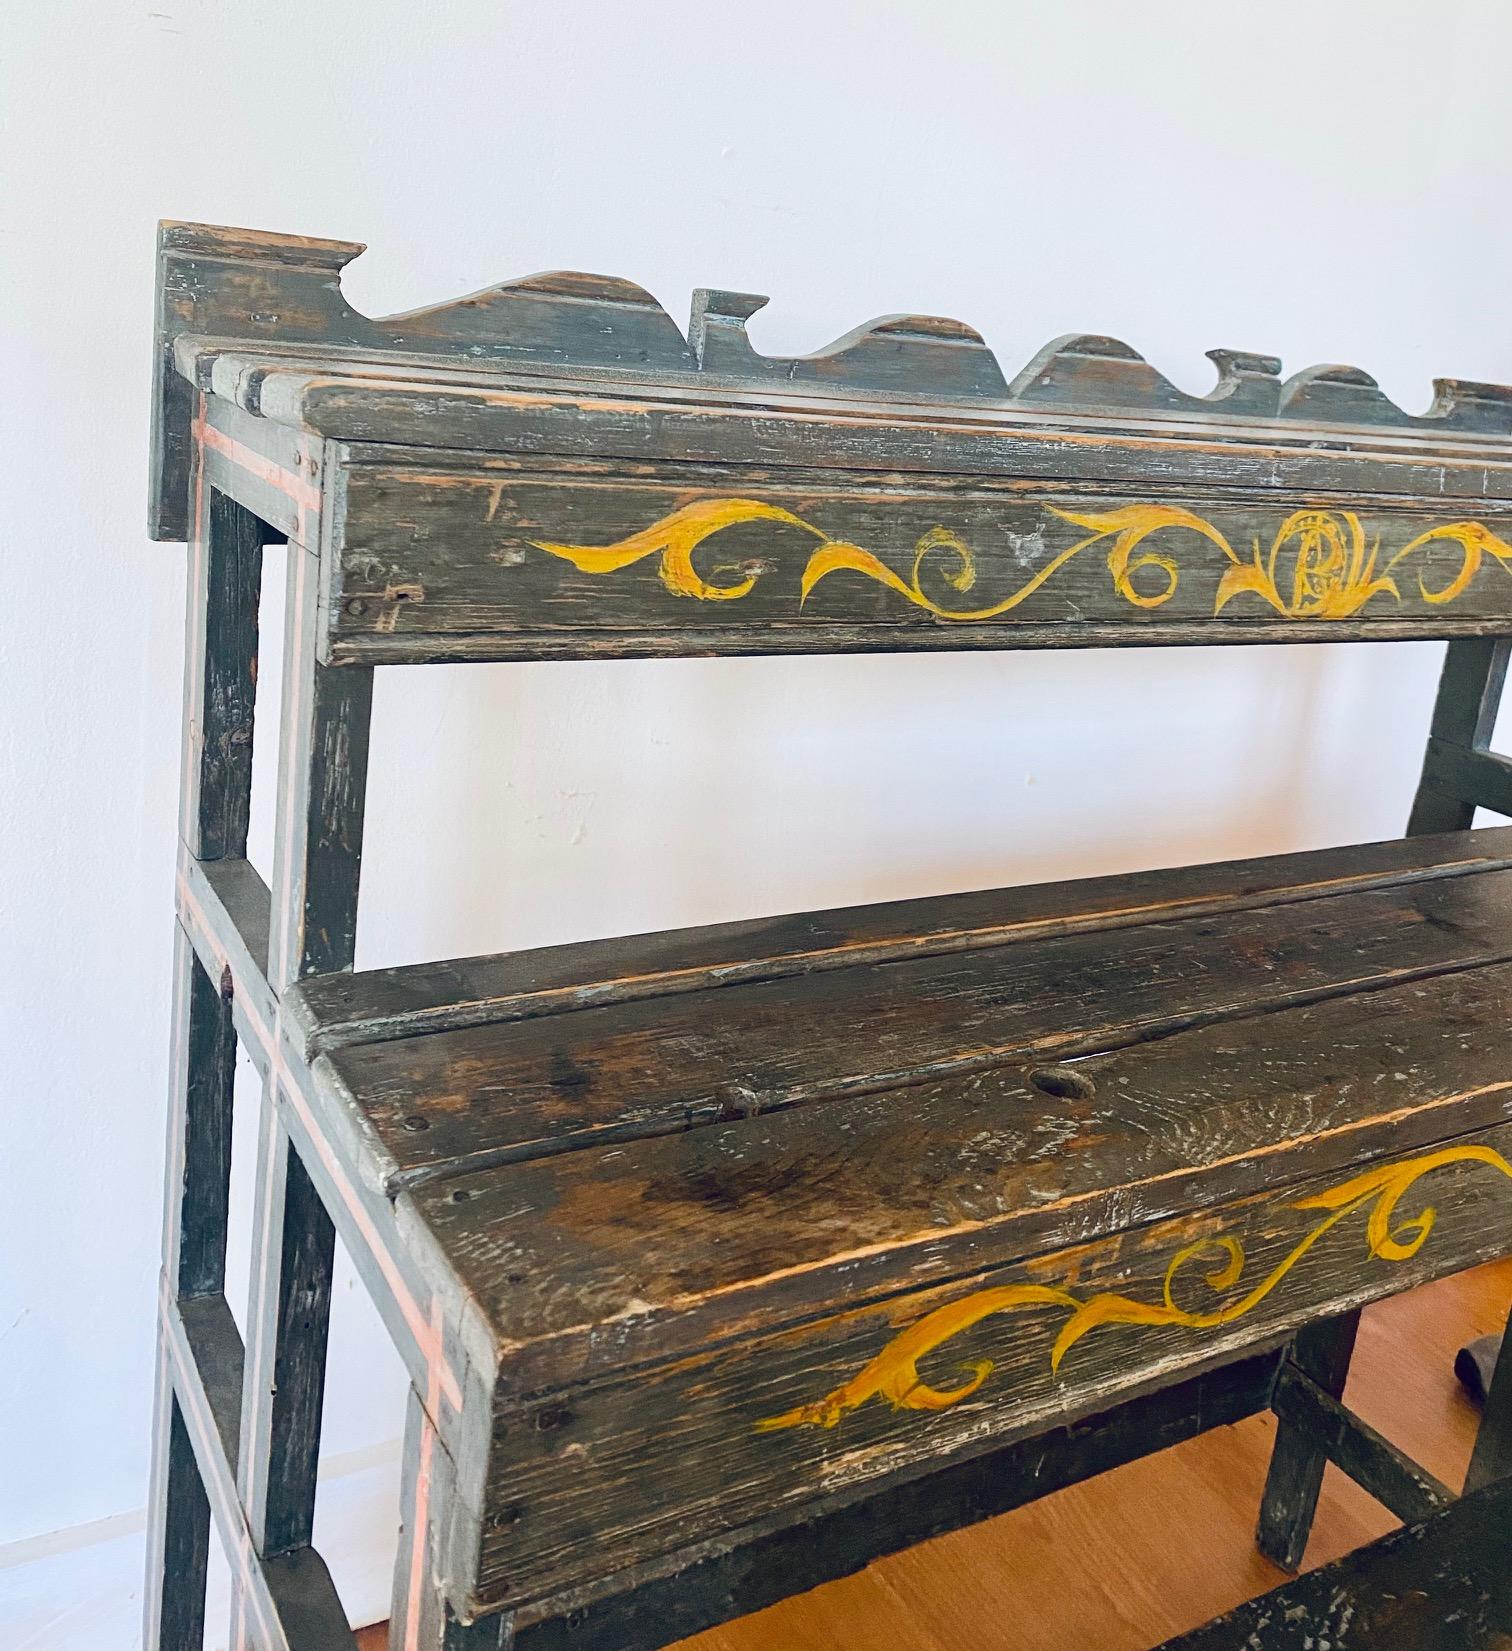 Antique Quebec paint decorated plant stand or bucket bench, circa 1890, pine slat construction with three shelves, fluted backsplash and apron, and delightful yellow scroll decoration on blue ground. From the collection of Peter Baker, author of